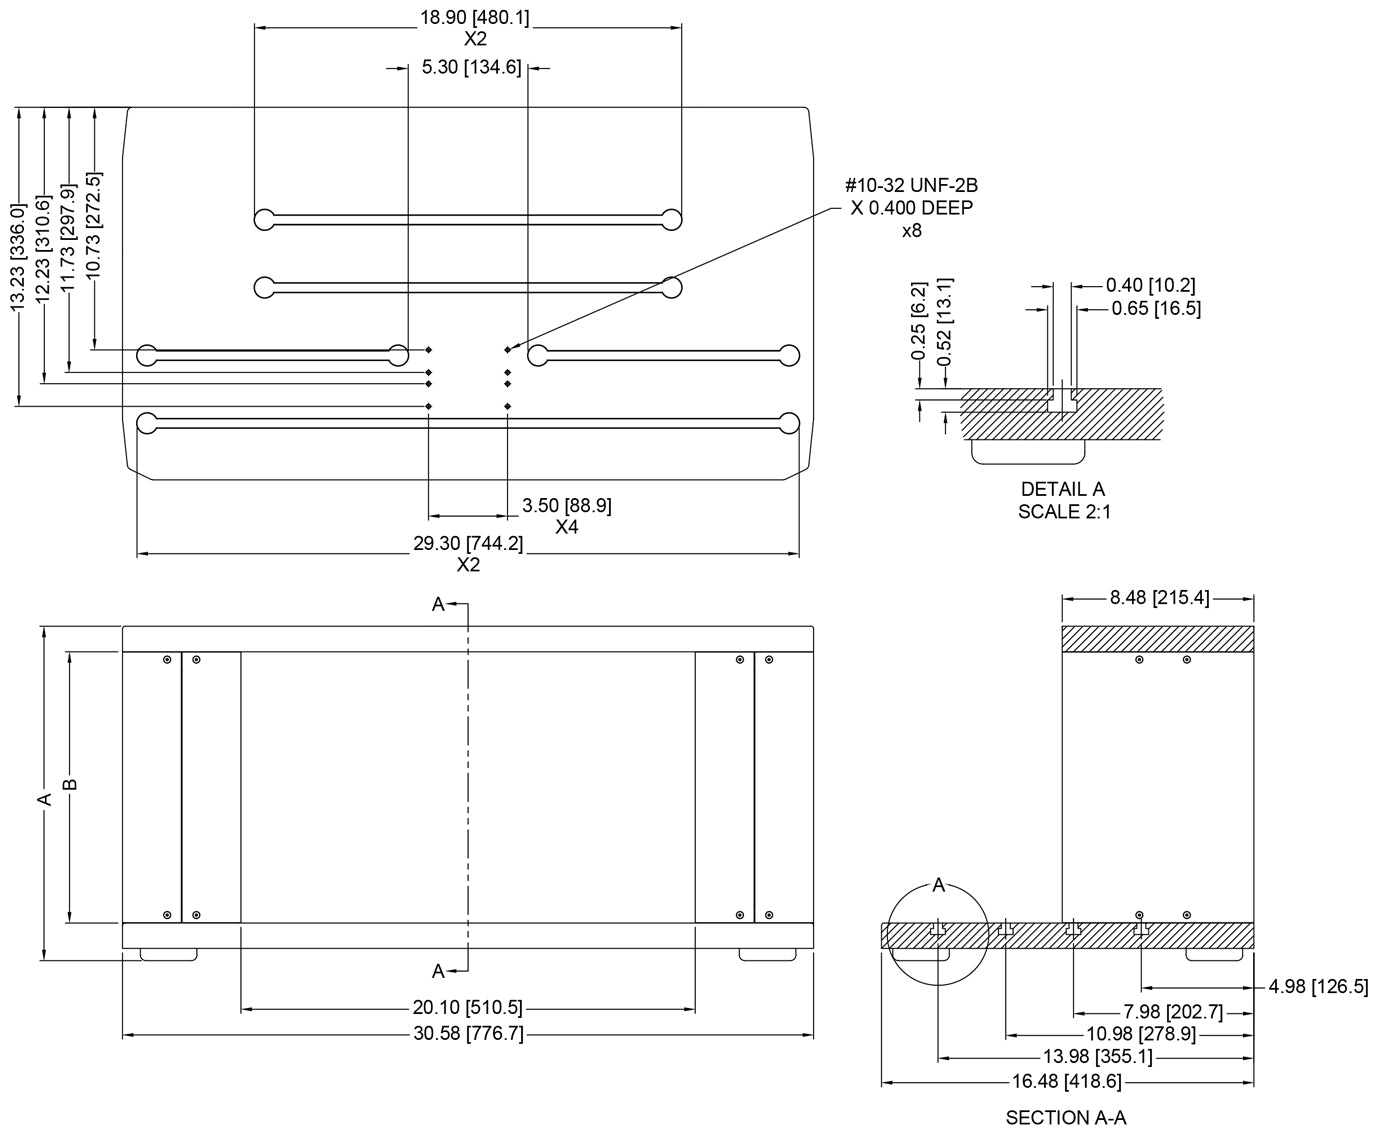 Dimensions for double column test stand extension